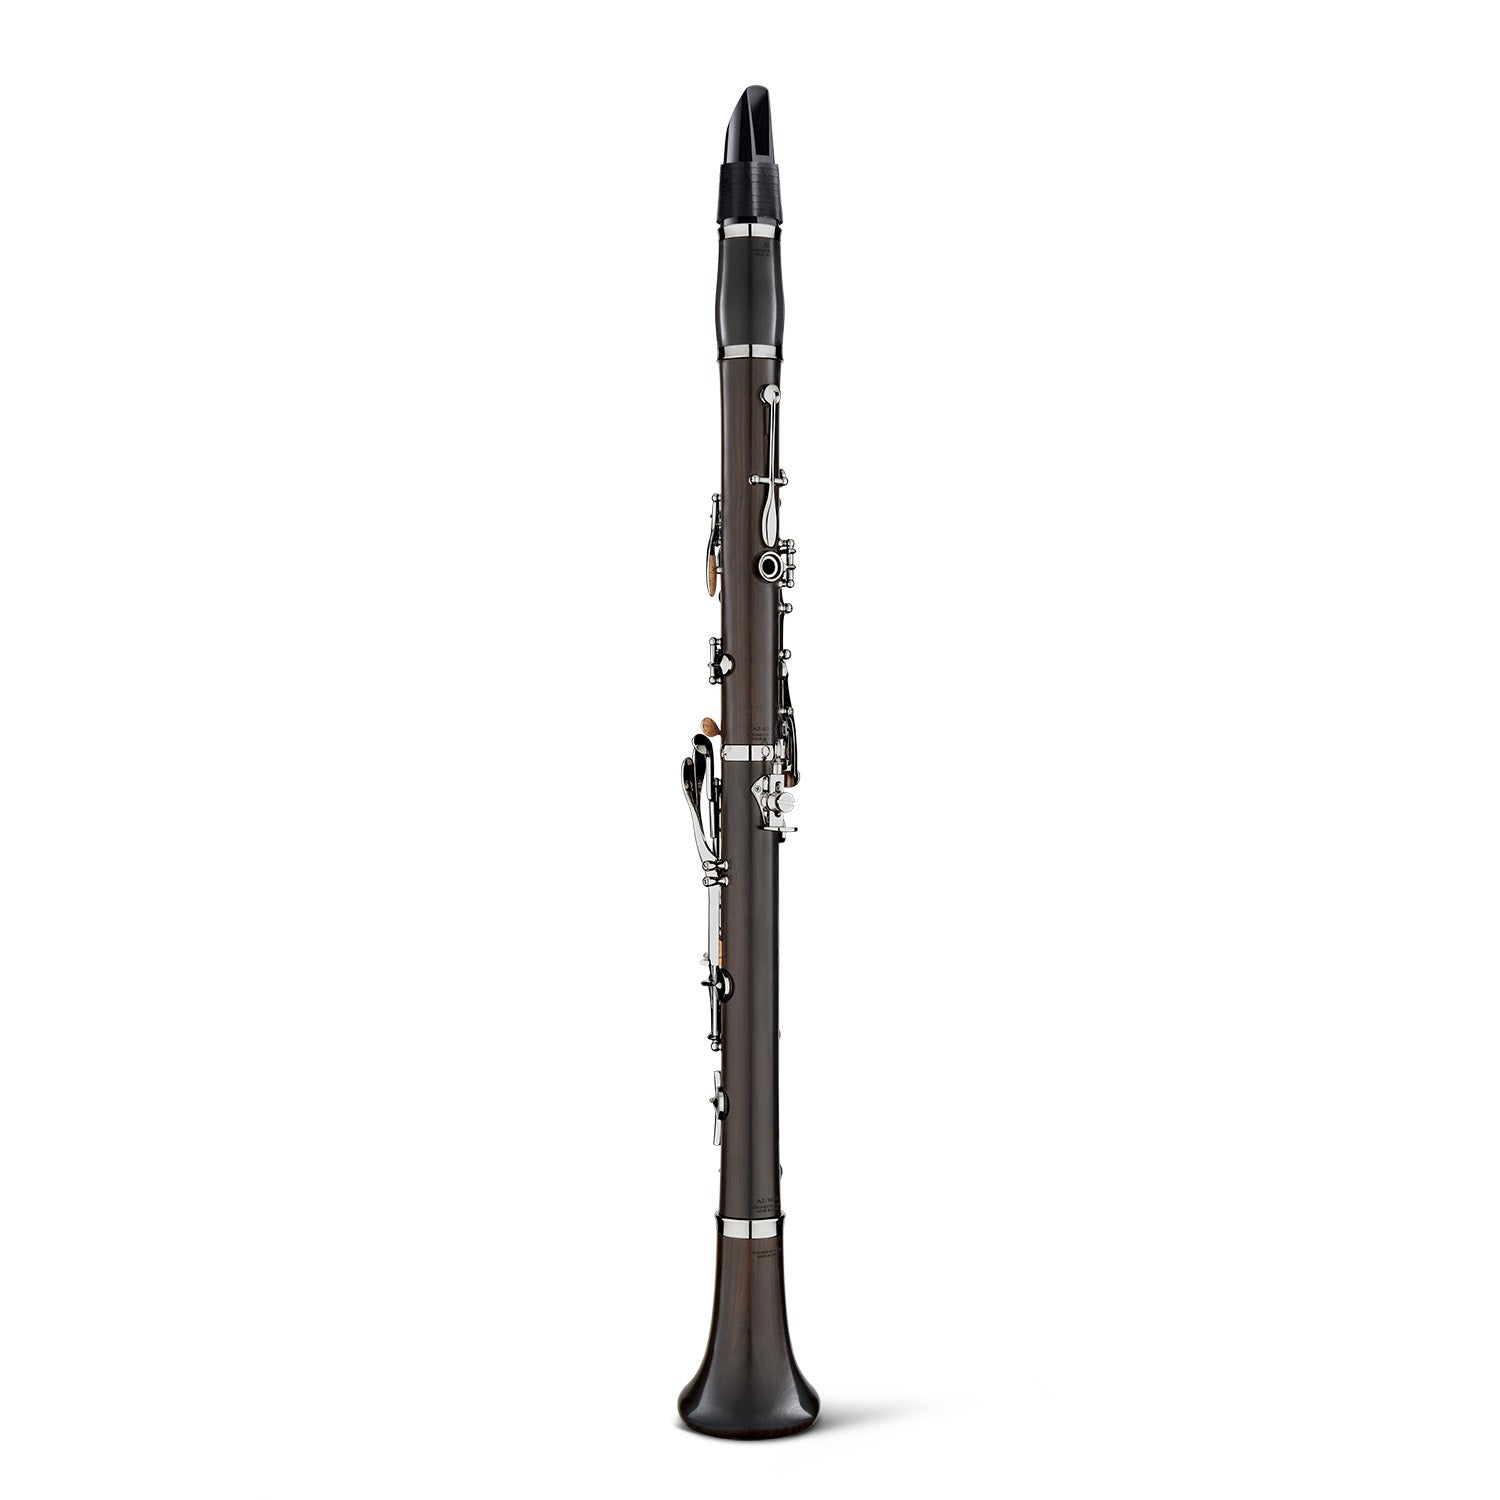 backun-bb-clarinet-alpha-plus-nickel-with-protege-mouthpiece-and-rovner-back